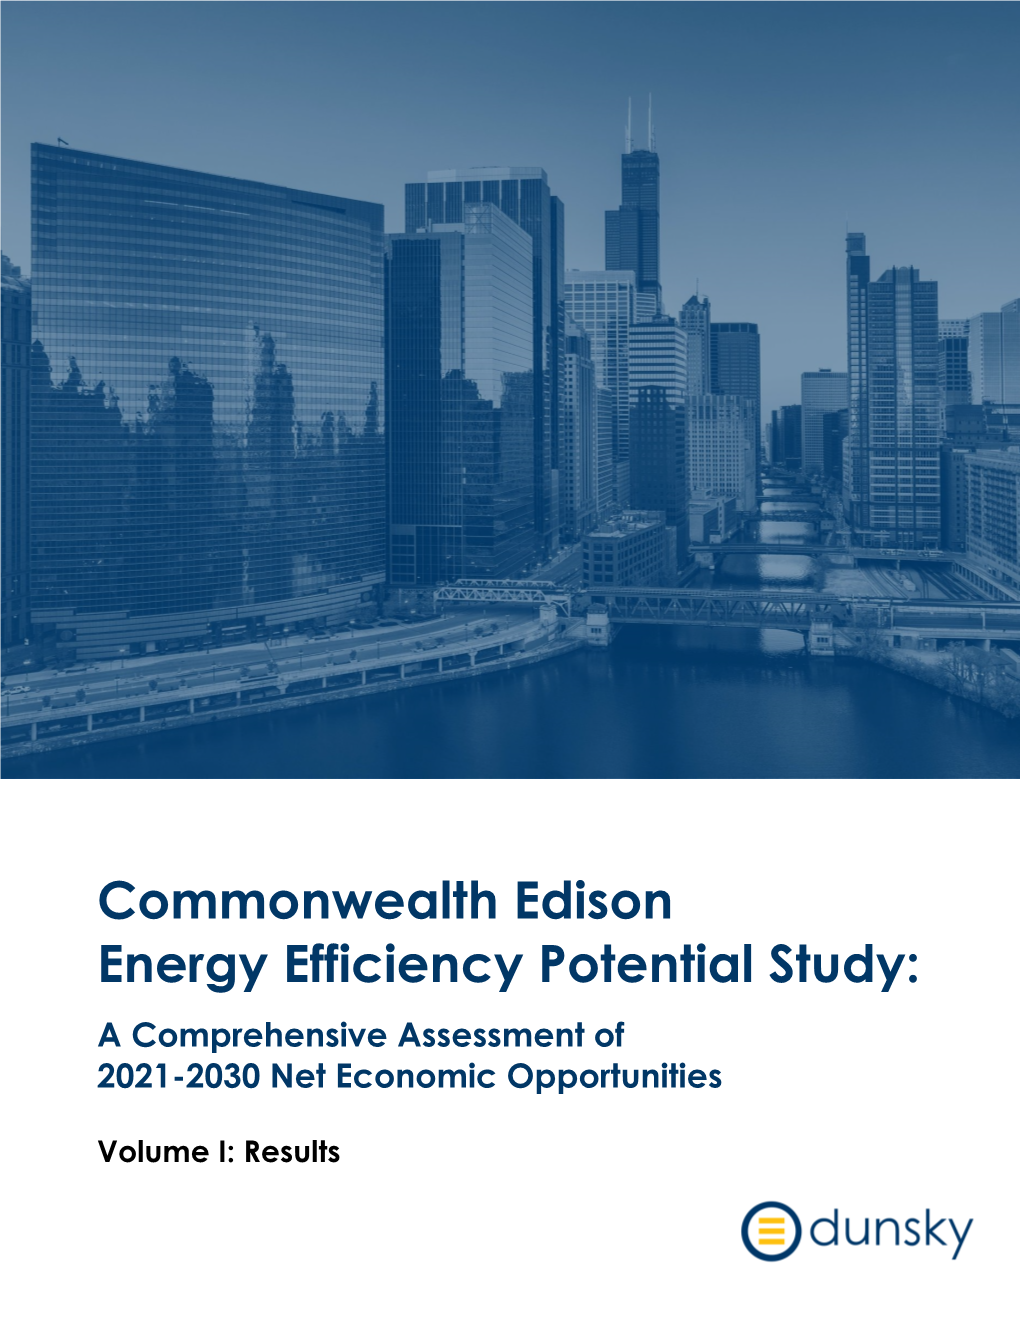 Commonwealth Edison Energy Efficiency Potential Study: a Comprehensive Assessment of 2021-2030 Net Economic Opportunities